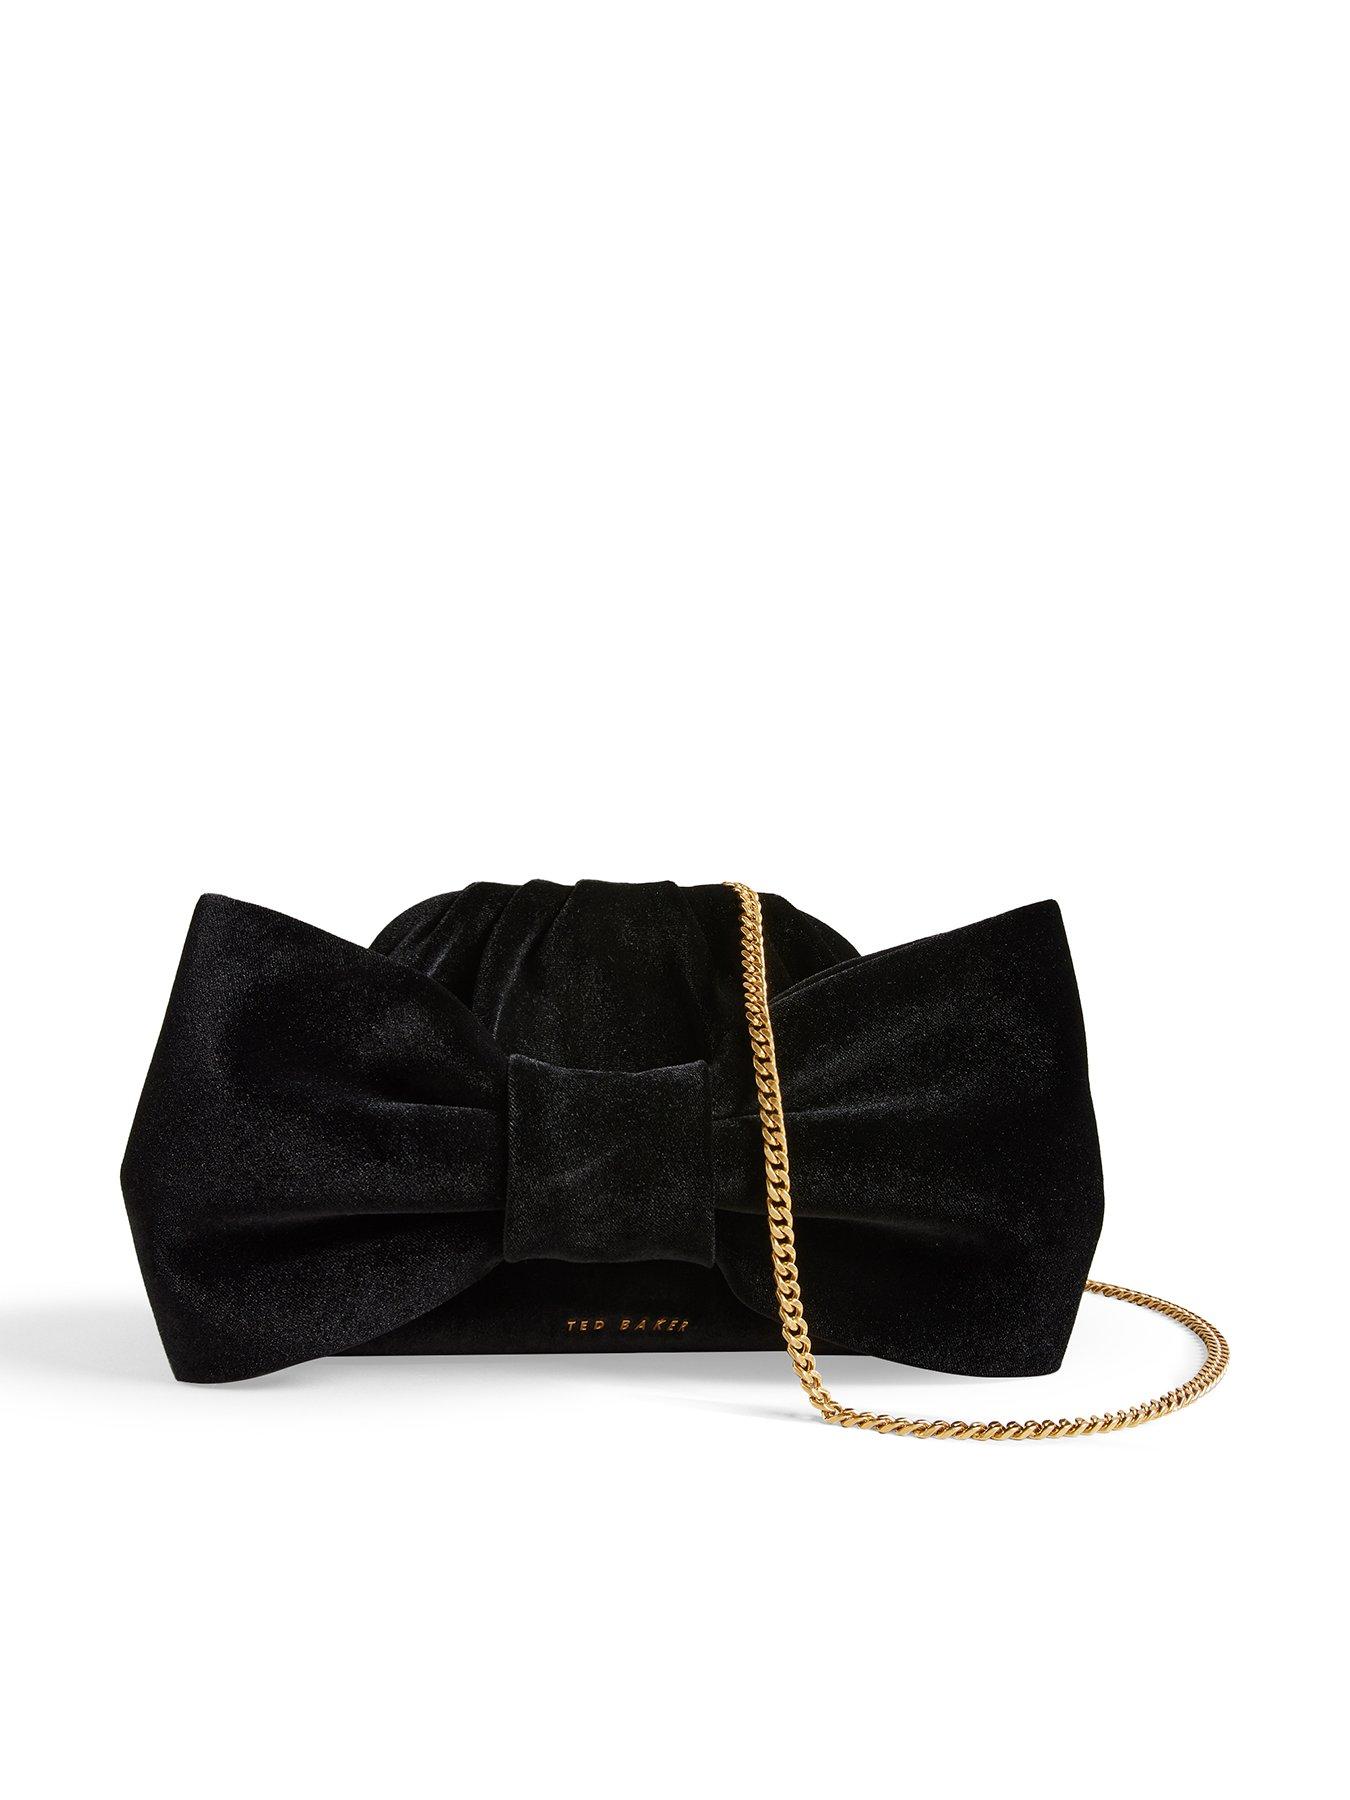 Ted Baker London Rose Gold Cutout Bow Clutch Handbag With Removable Chain